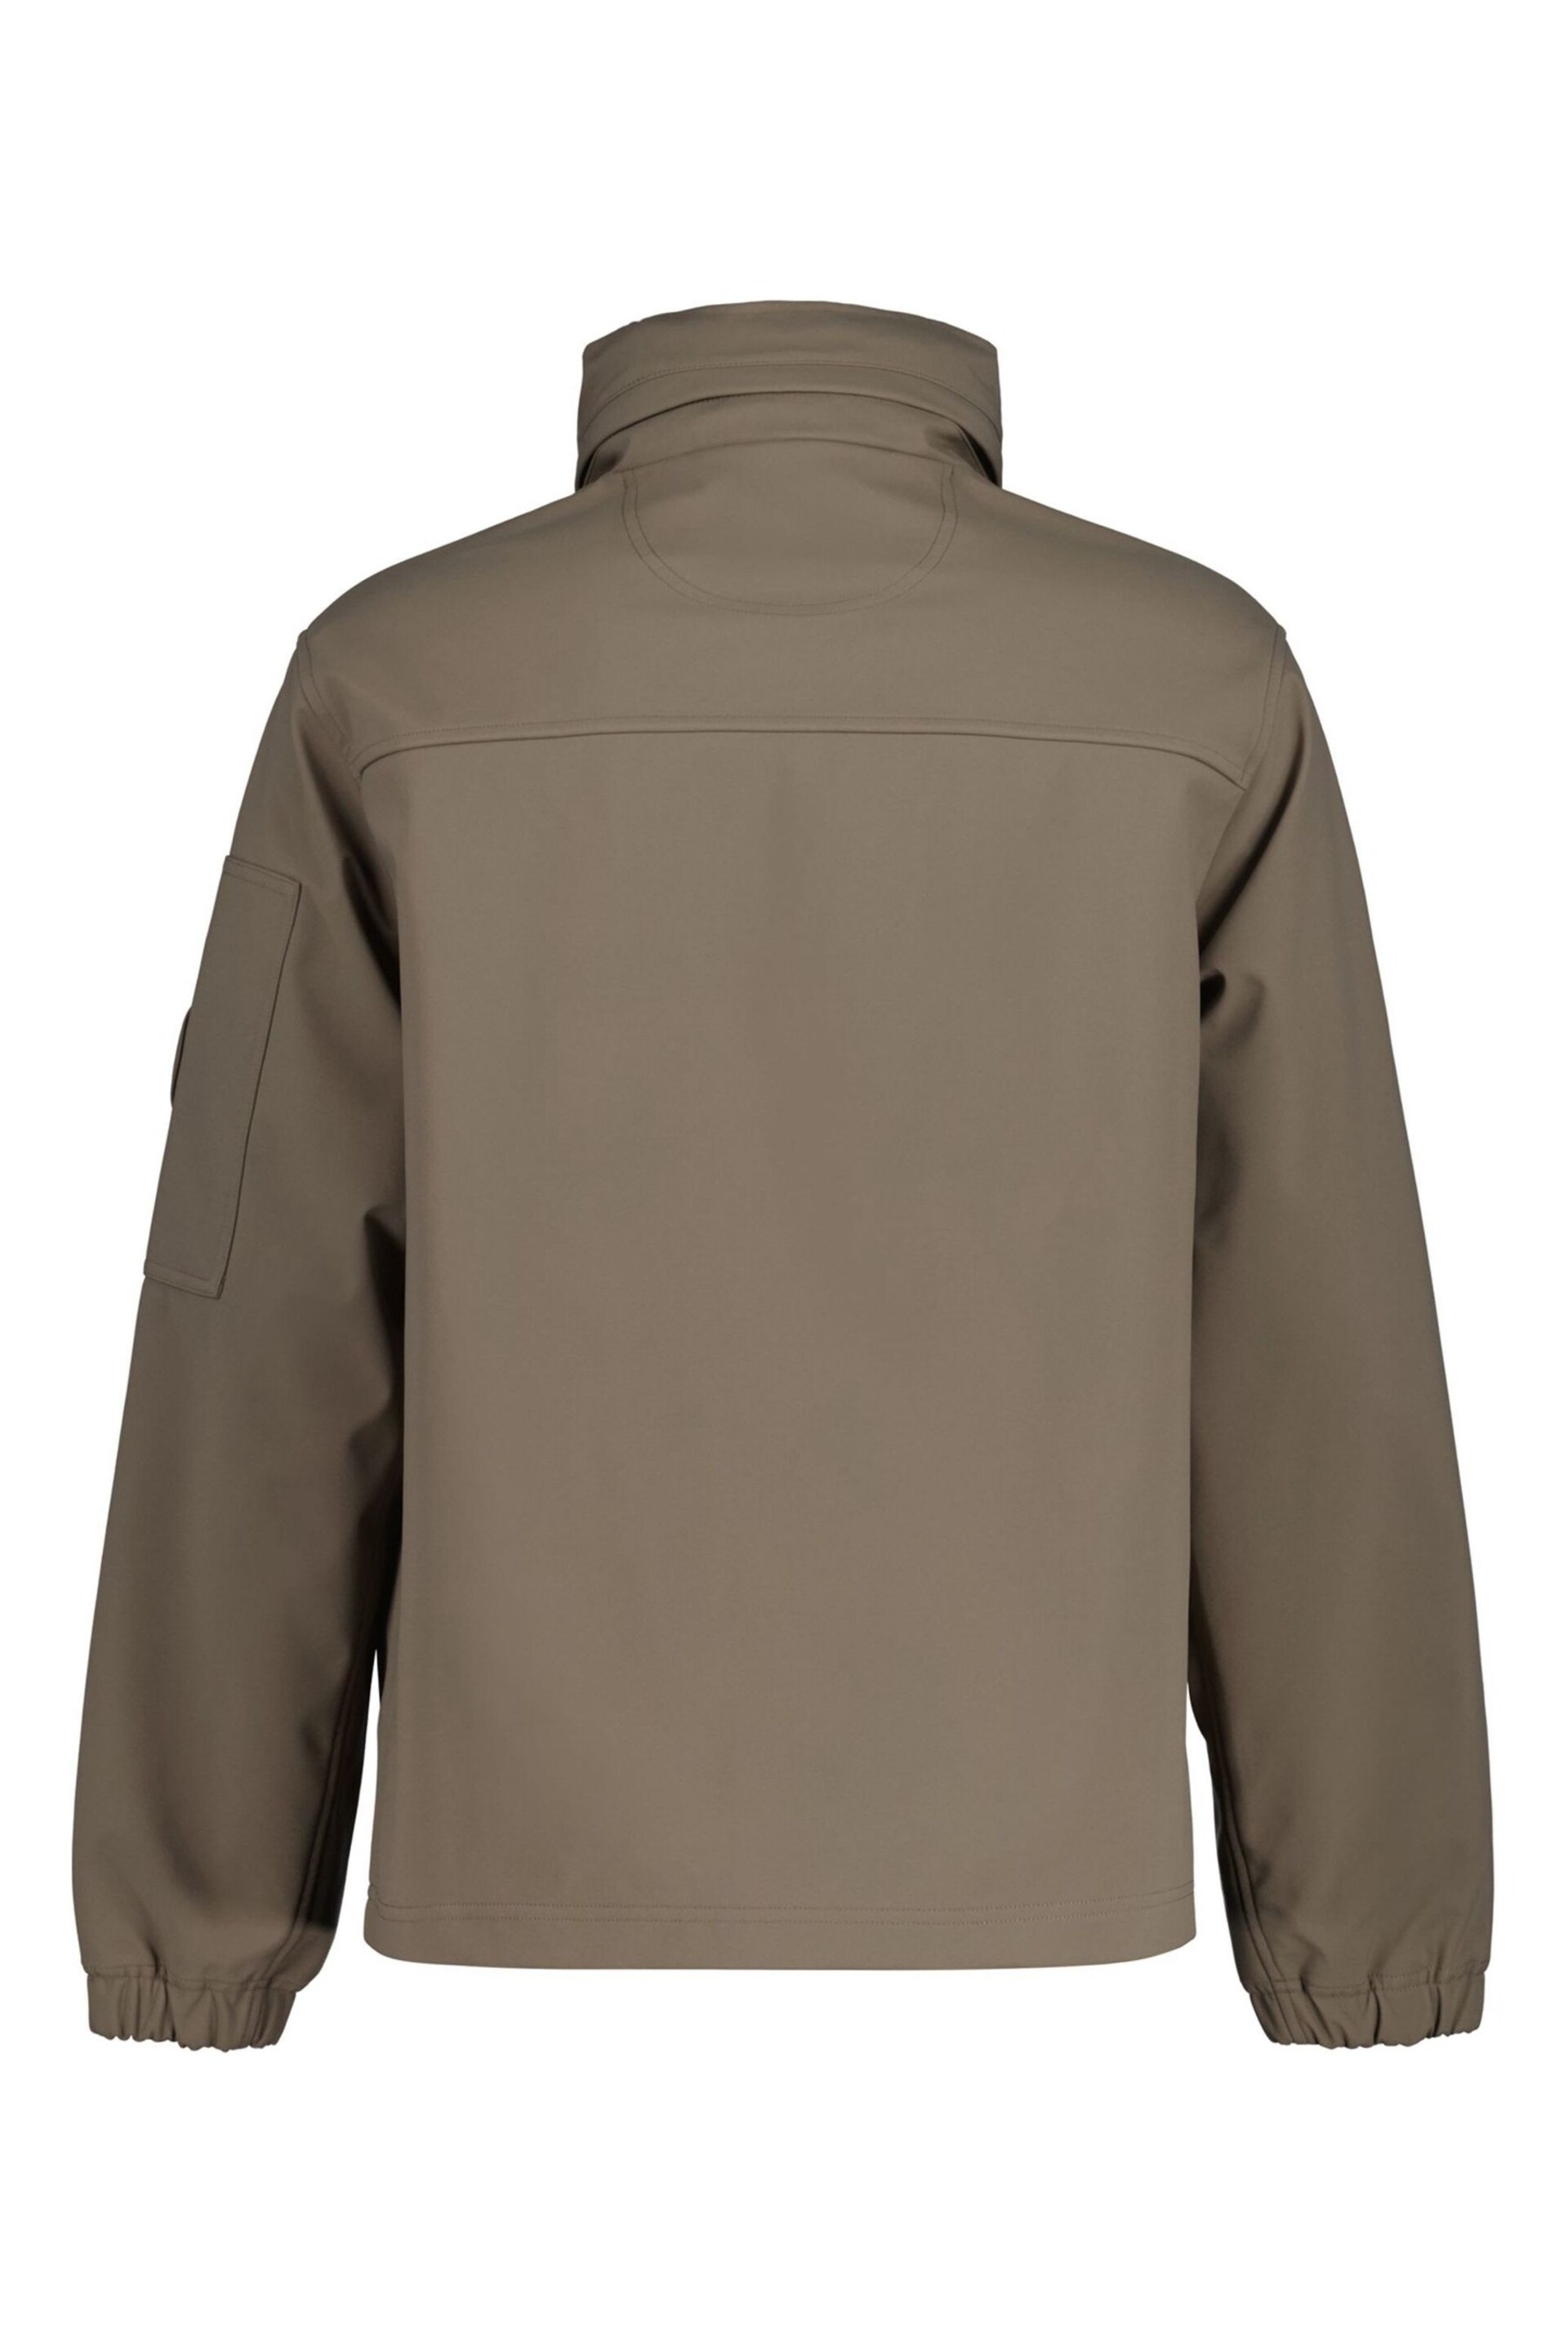 GANT Soft Shell Water Repellent Jacket - Image 8 of 8